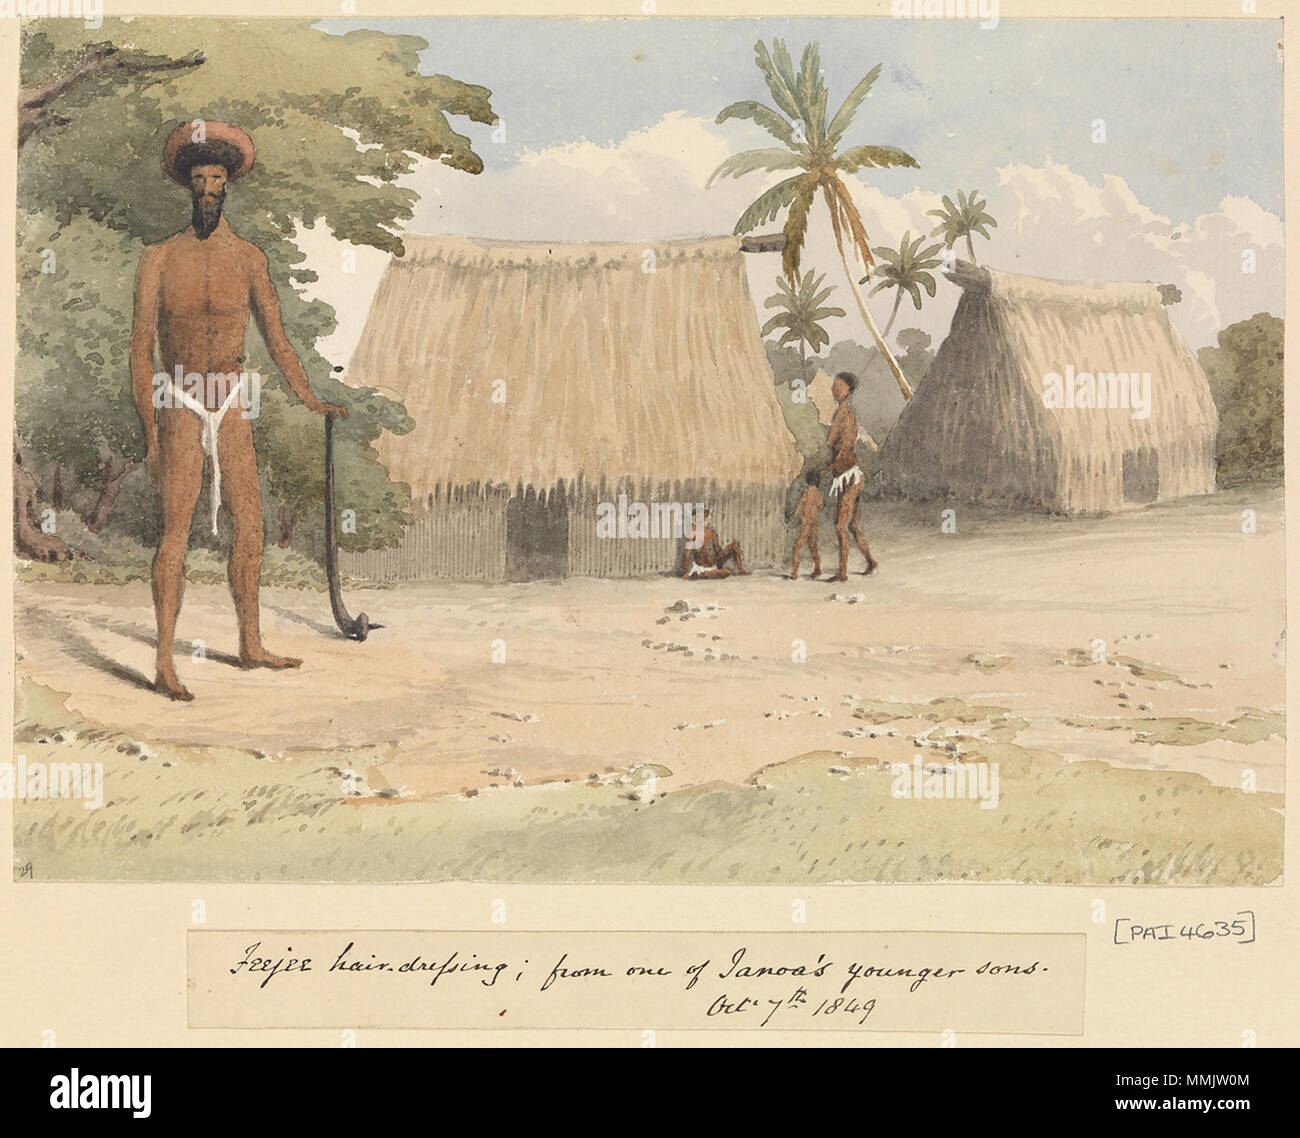 . English: 'Feejee hair-dressing; from one Tanoa's younger sons, Octr 7th 1849' [Fiji].  . 7 October 1849. Admiral Edward Gennys Fanshawe (27 November 1814 – 21 October 1906). Edward Gennys Fanshawe, Feejee hair-dressing; from one Tanoa's younger sons, Octr 7th 1849 (Fiji) Stock Photo